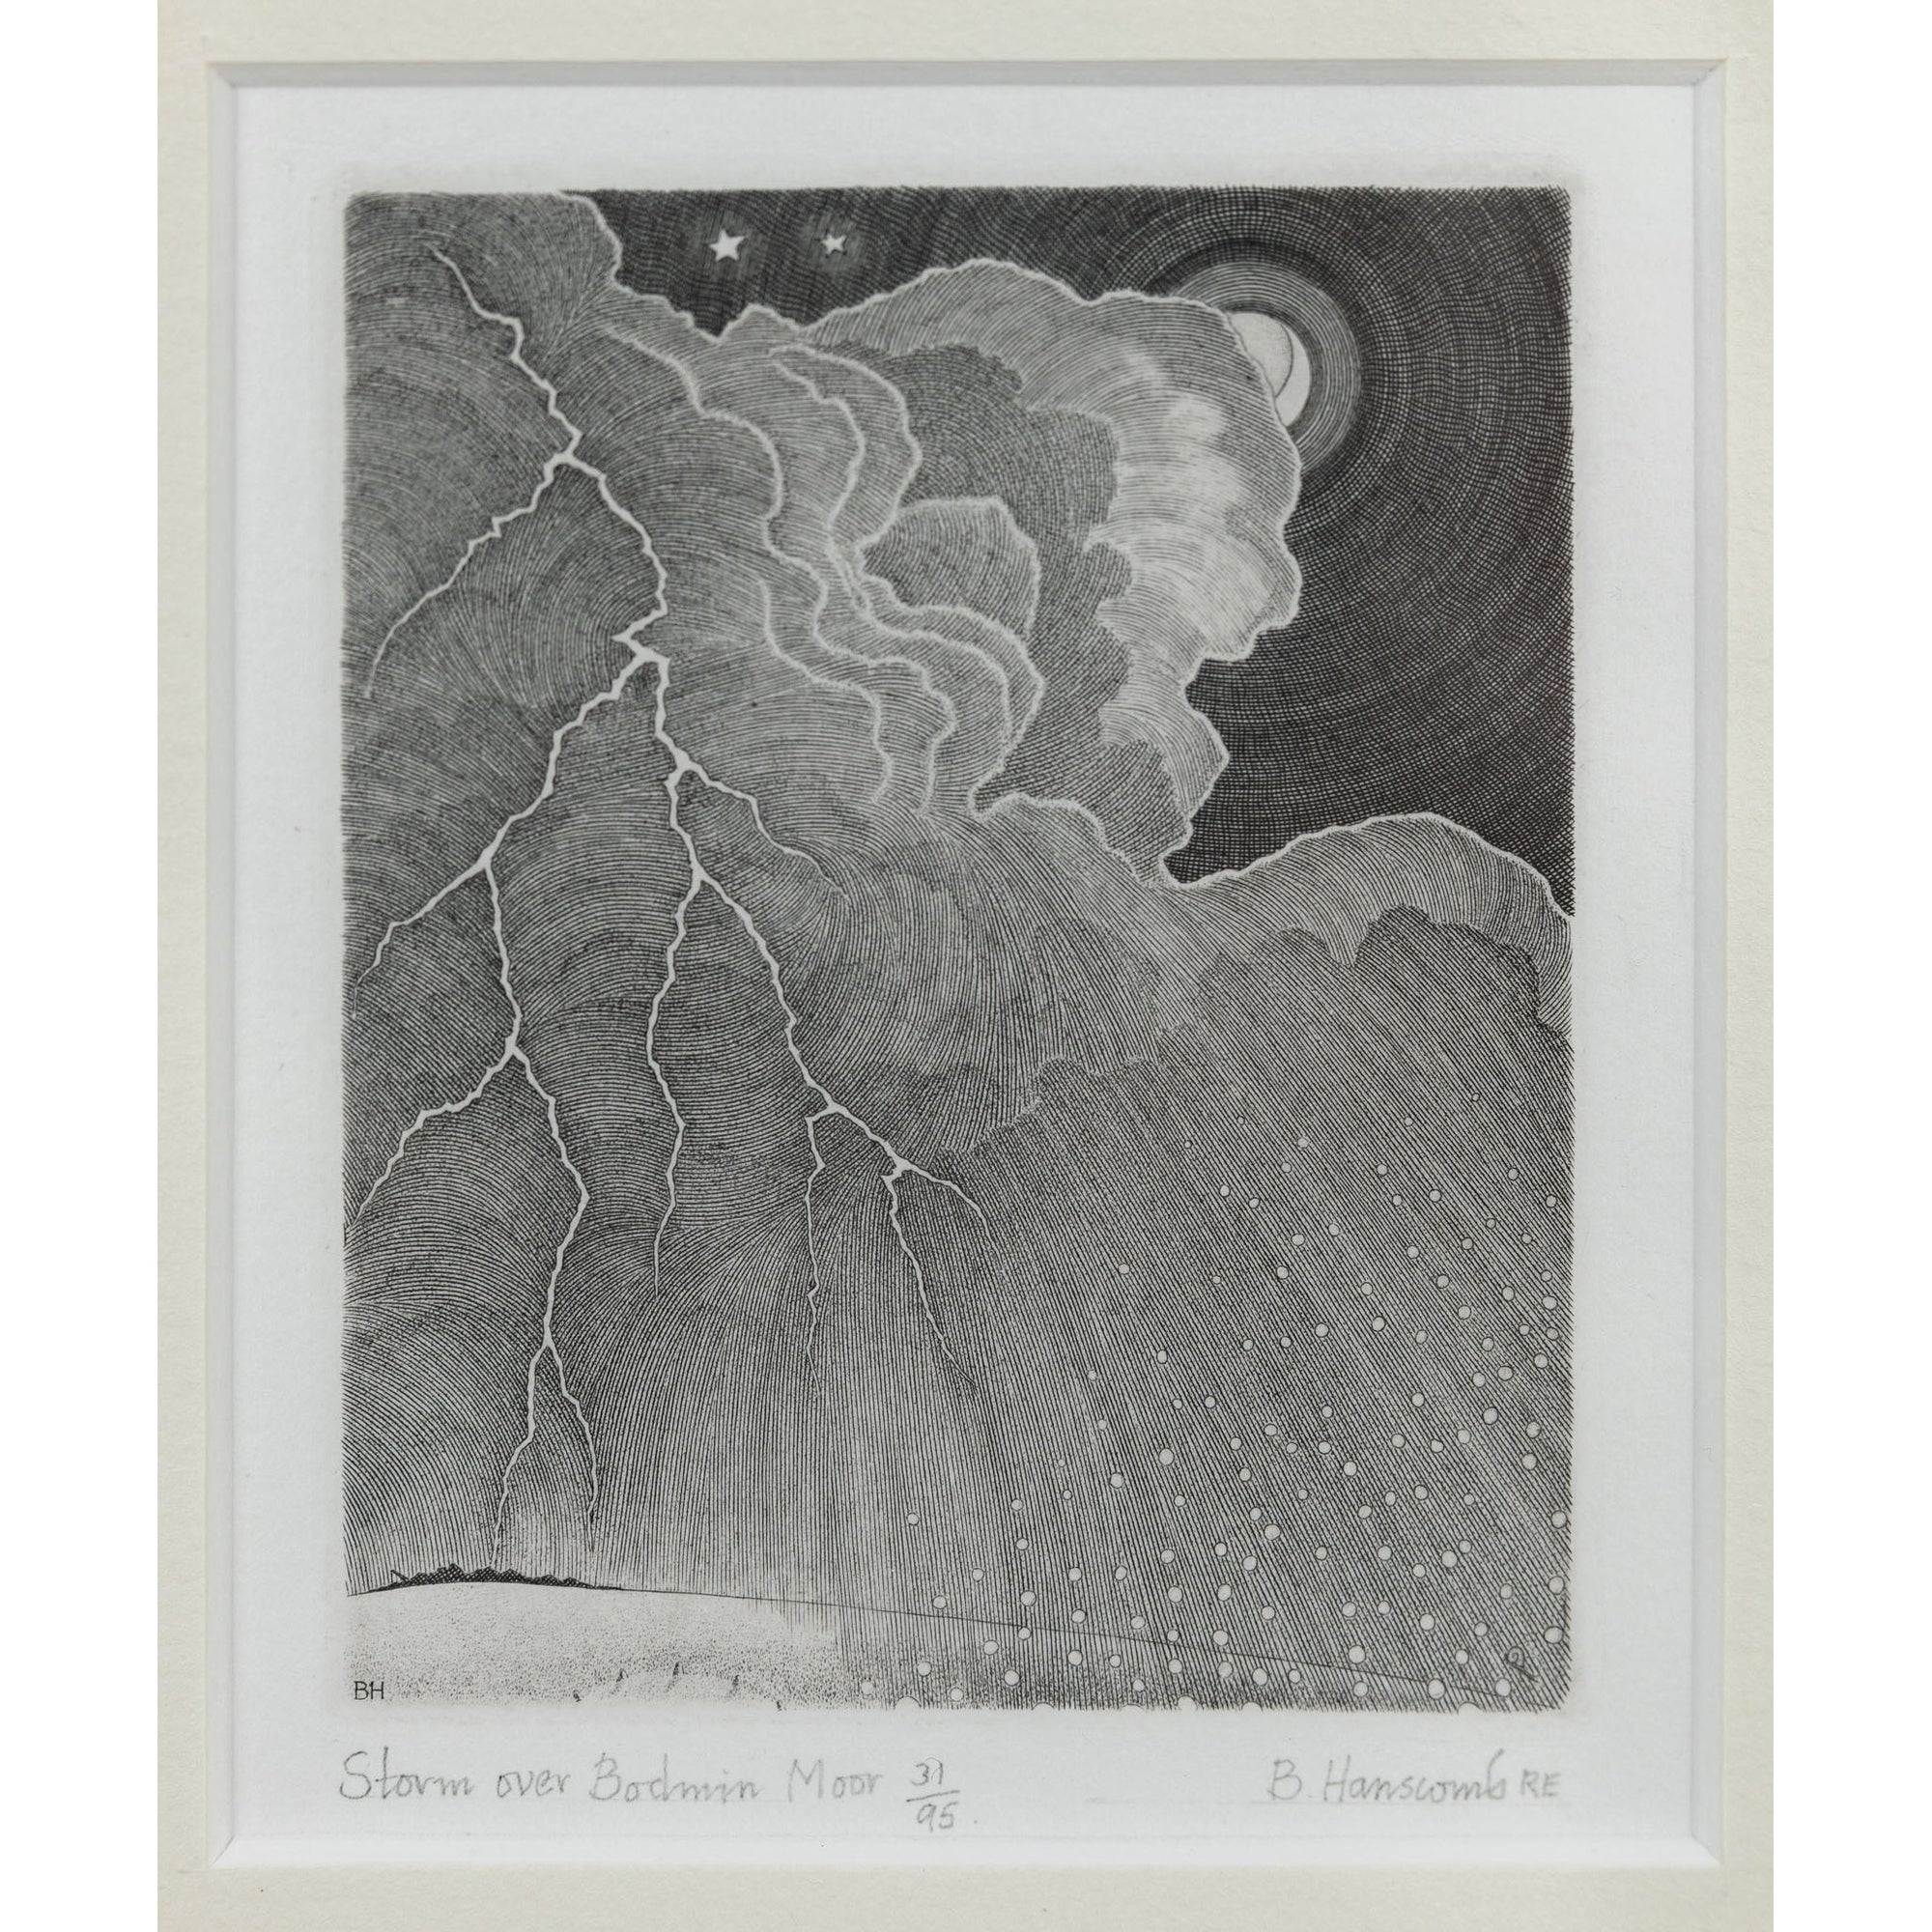 'Storm over Bodmin Moor' copperplate engraving by Brian Hanscomb, available at Padstow Gallery, Cornwall